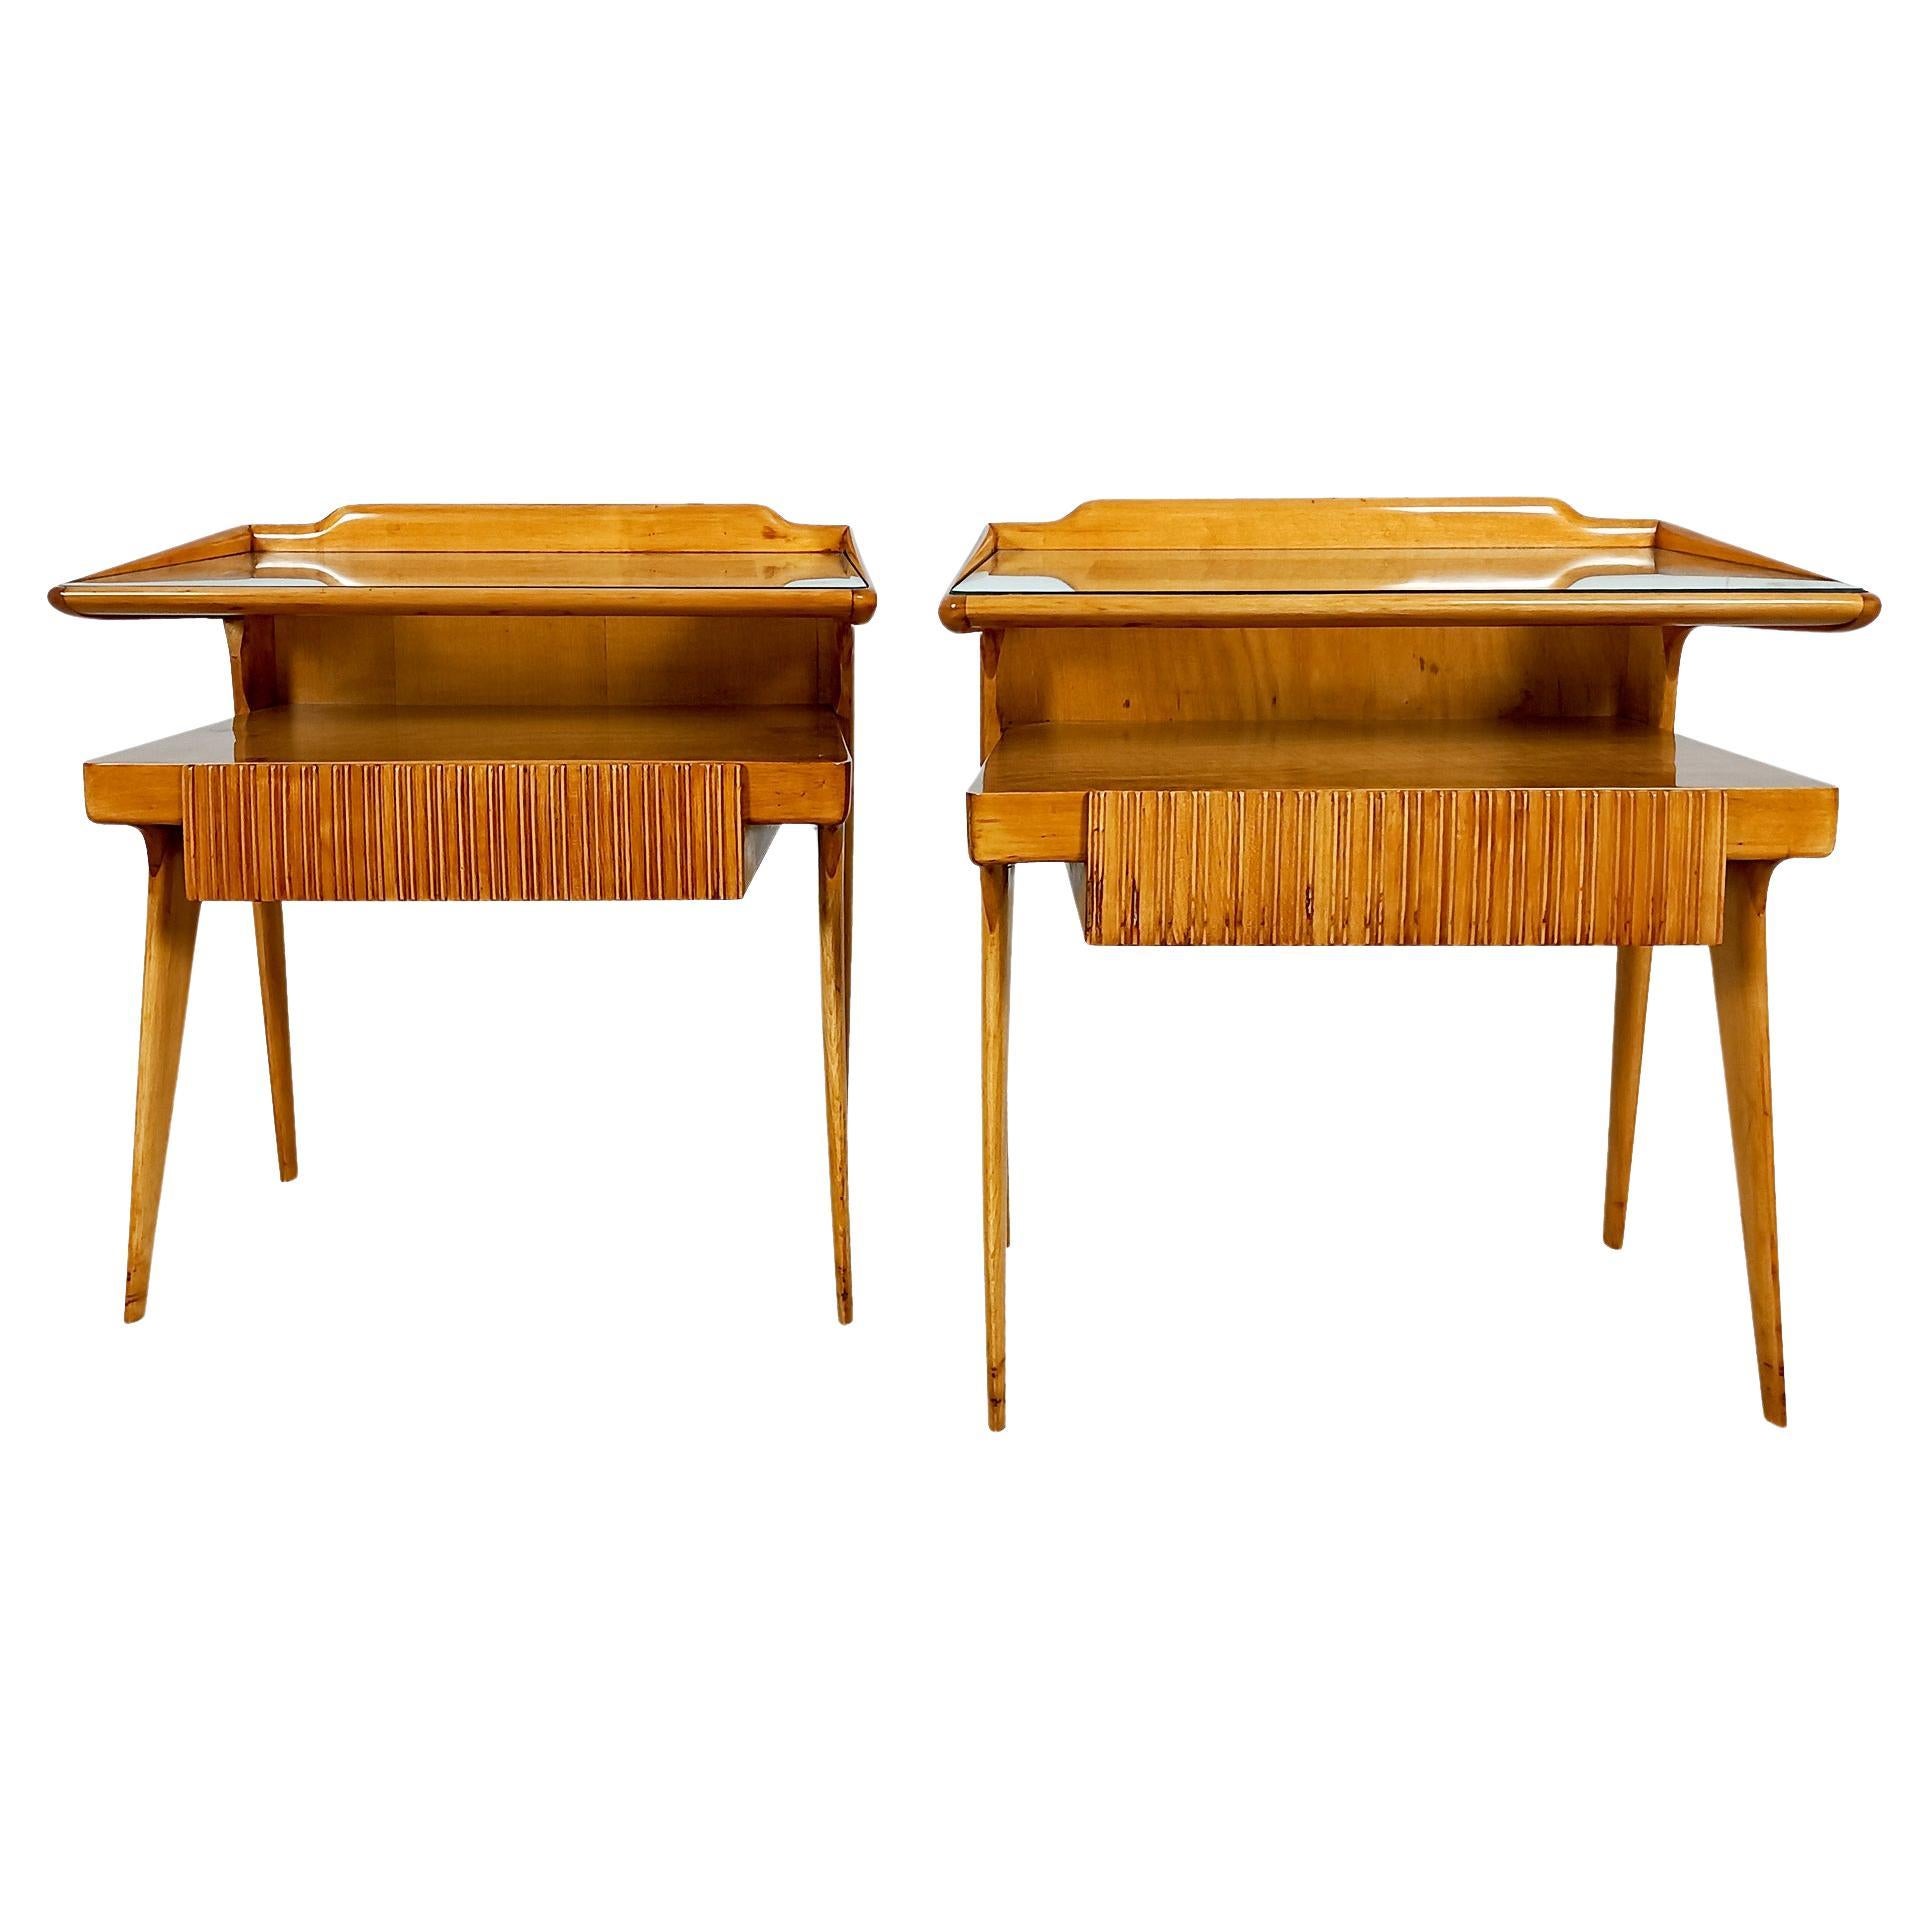 Pair of Mid-Century Modern Bedside Tables in Solid Maple and Glass Shelf, Italy For Sale